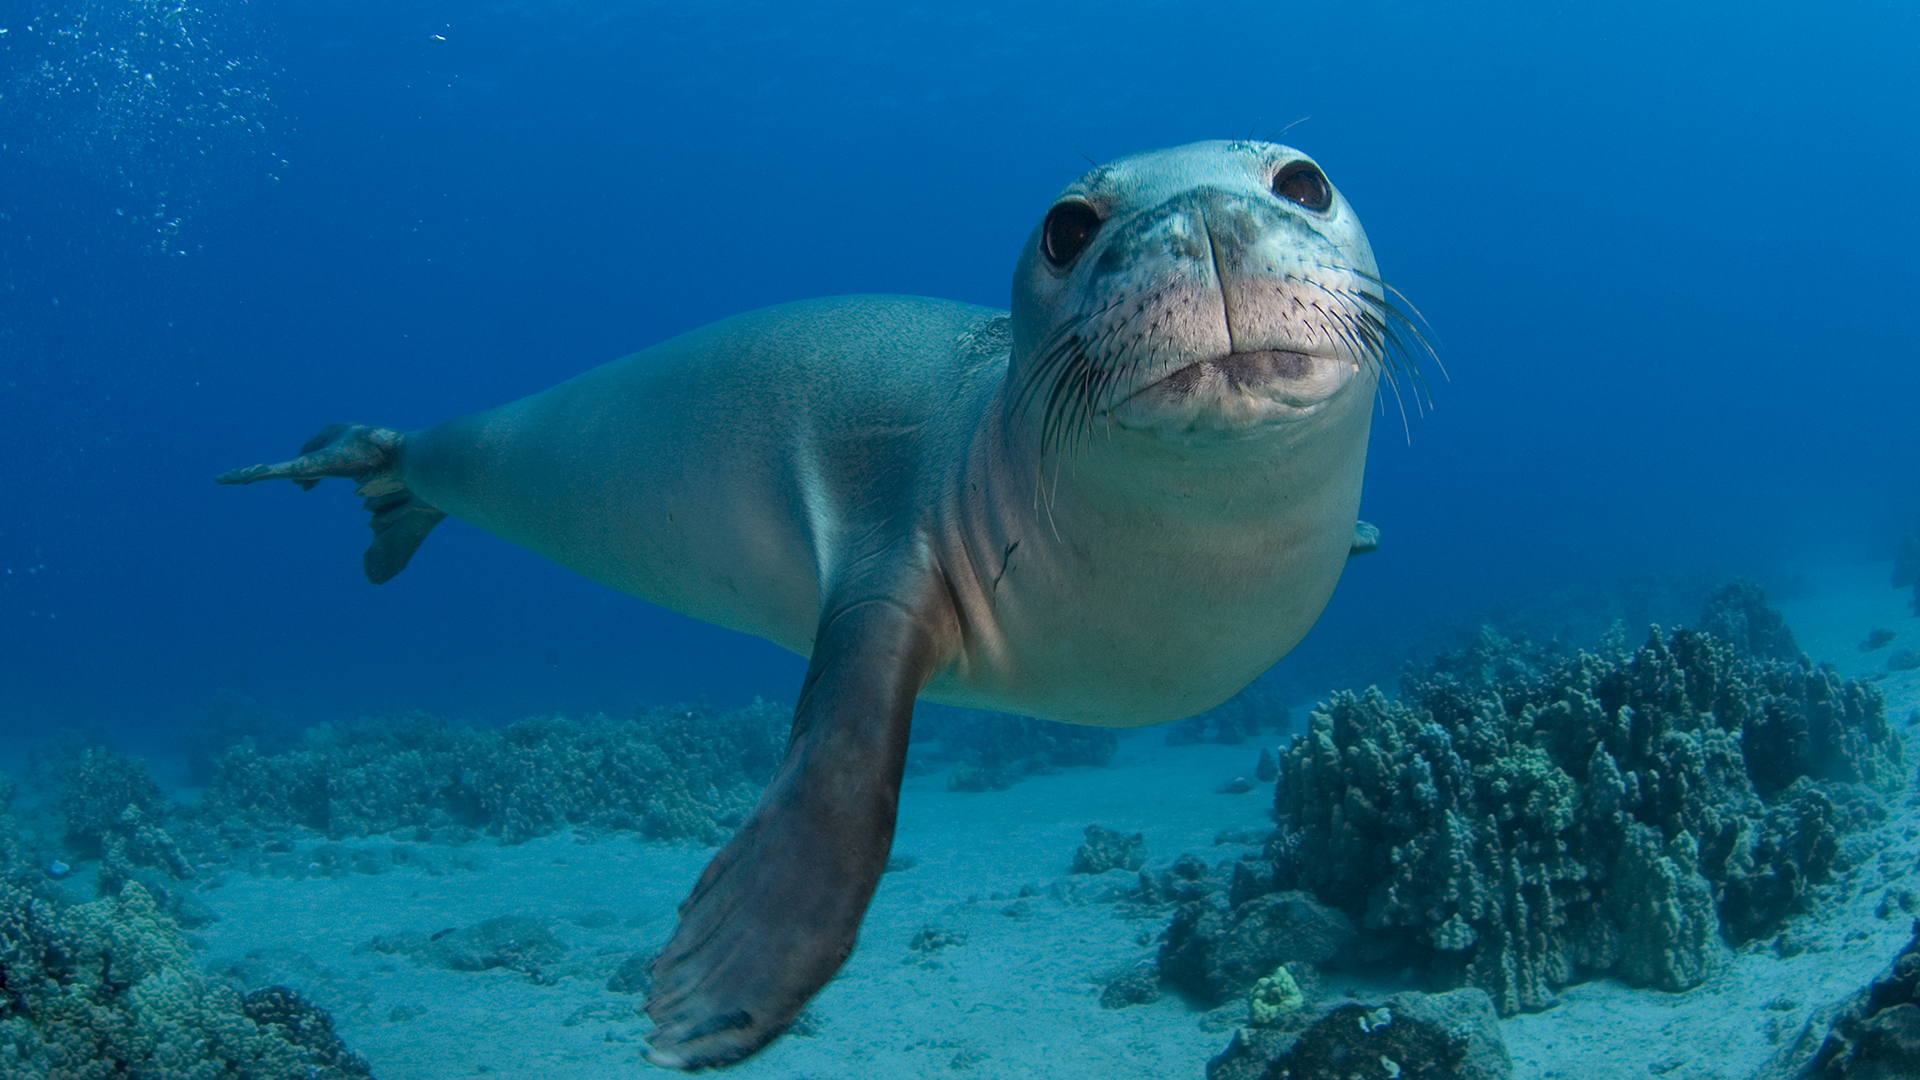 Monk seal in water looking at camera